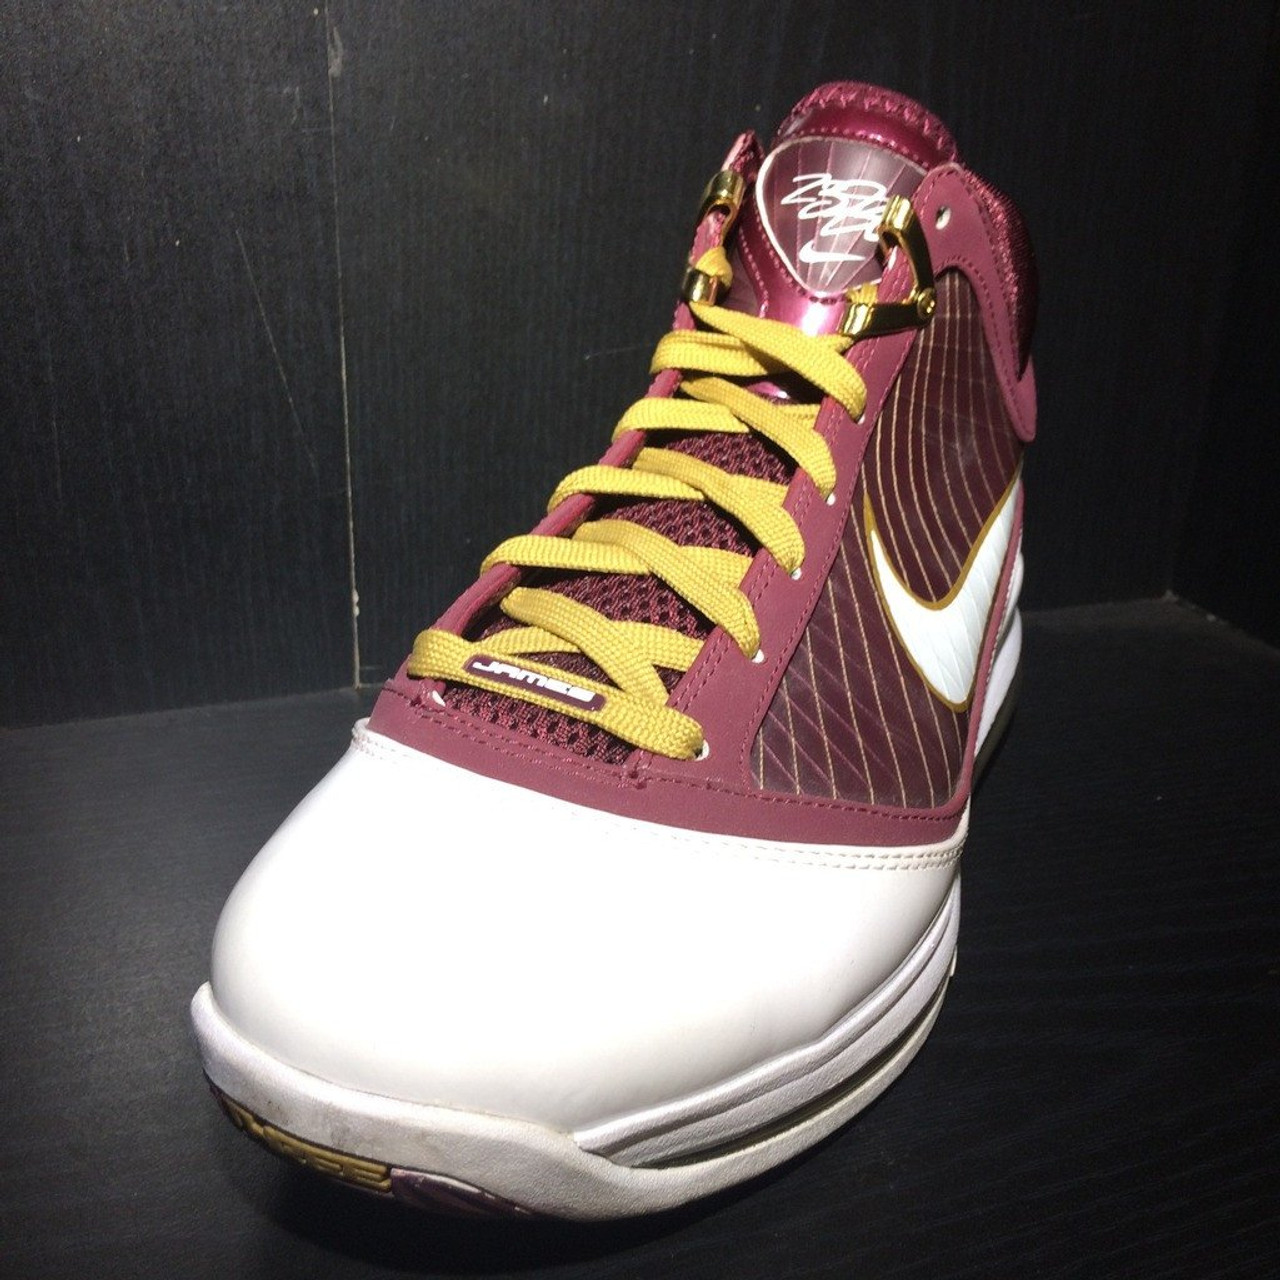 The King Rocks the LeBron 7 Media Day and Another 17 Low, Nice Kicks